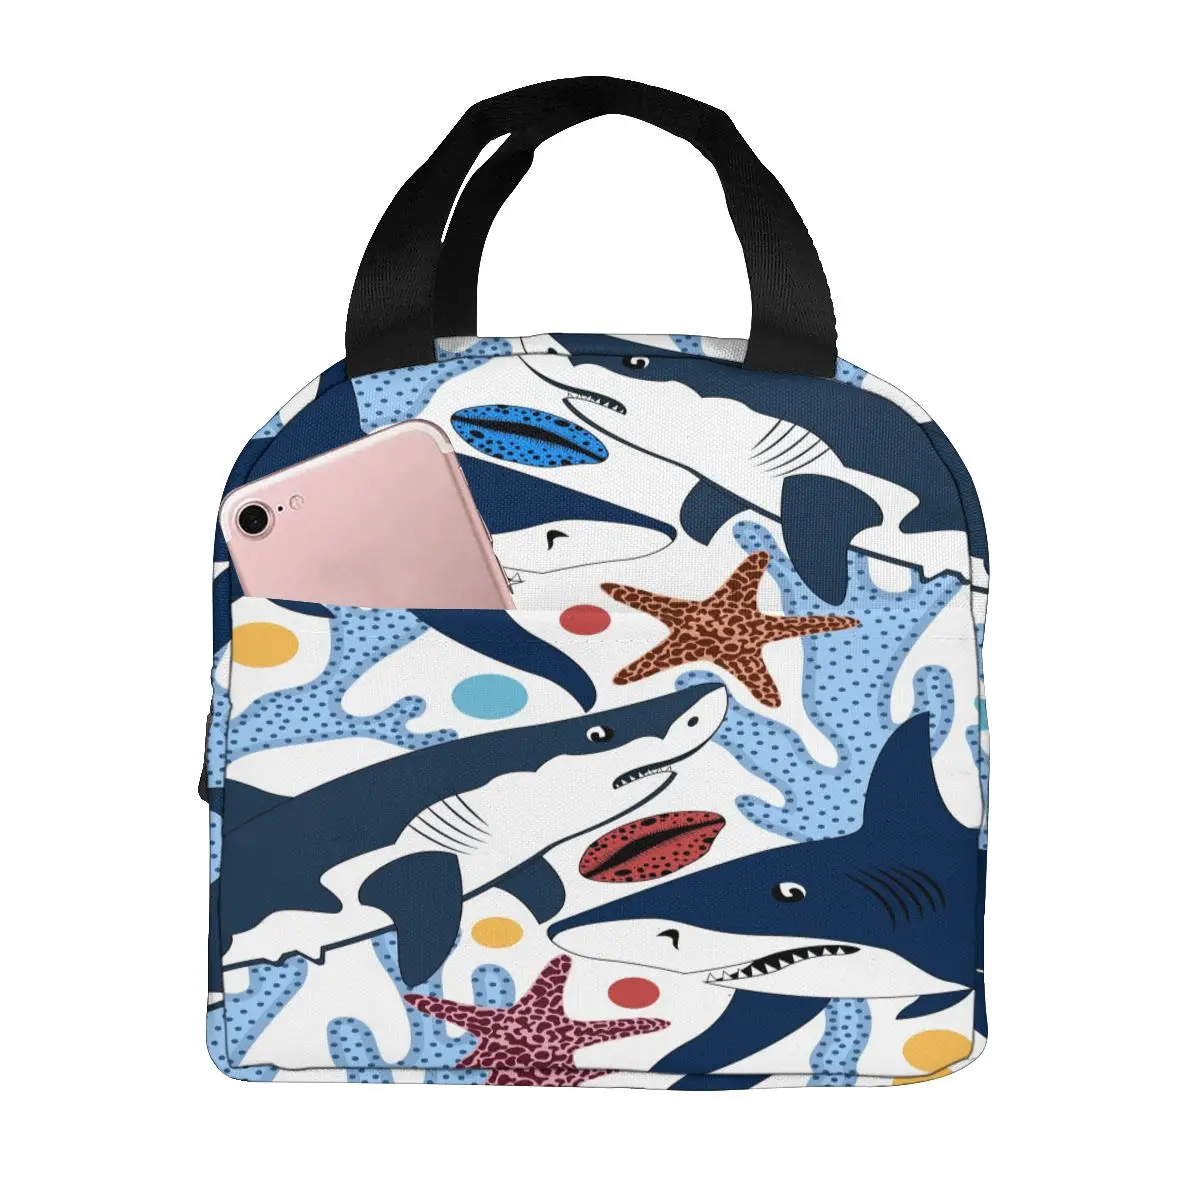 

Sharks Shells Starfishes Corals Sea Lunch Bag Portable Insulated Thermal Cooler Bento Lunch Box Tote Picnic Storage Bag Pouch